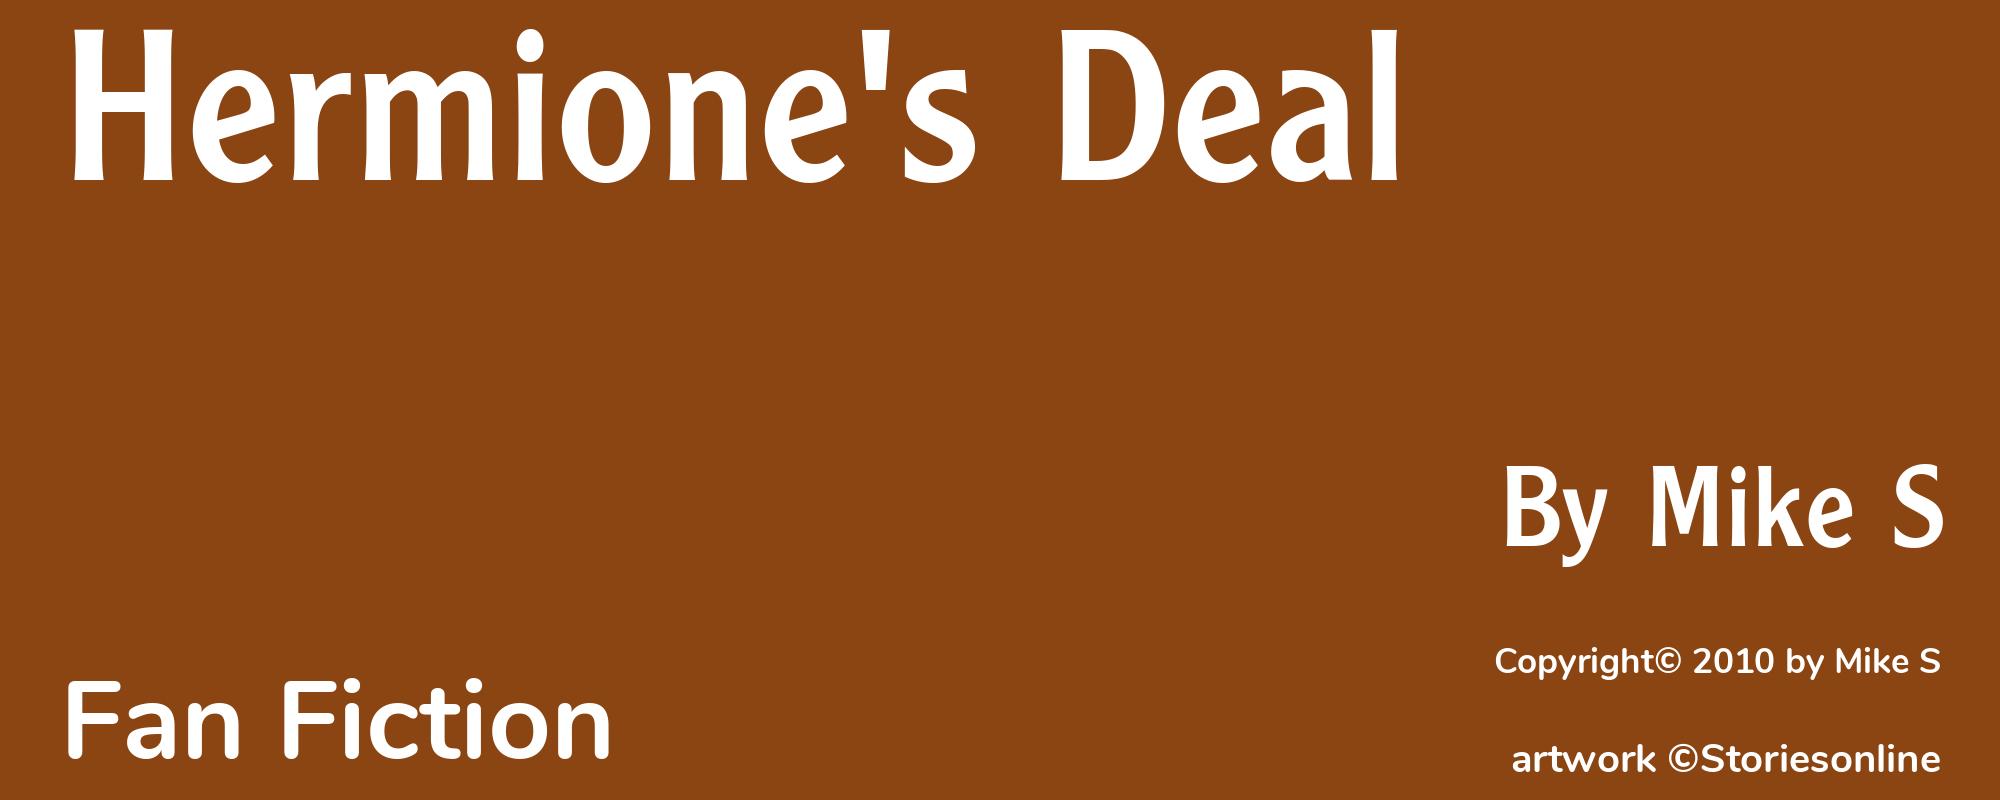 Hermione's Deal - Cover